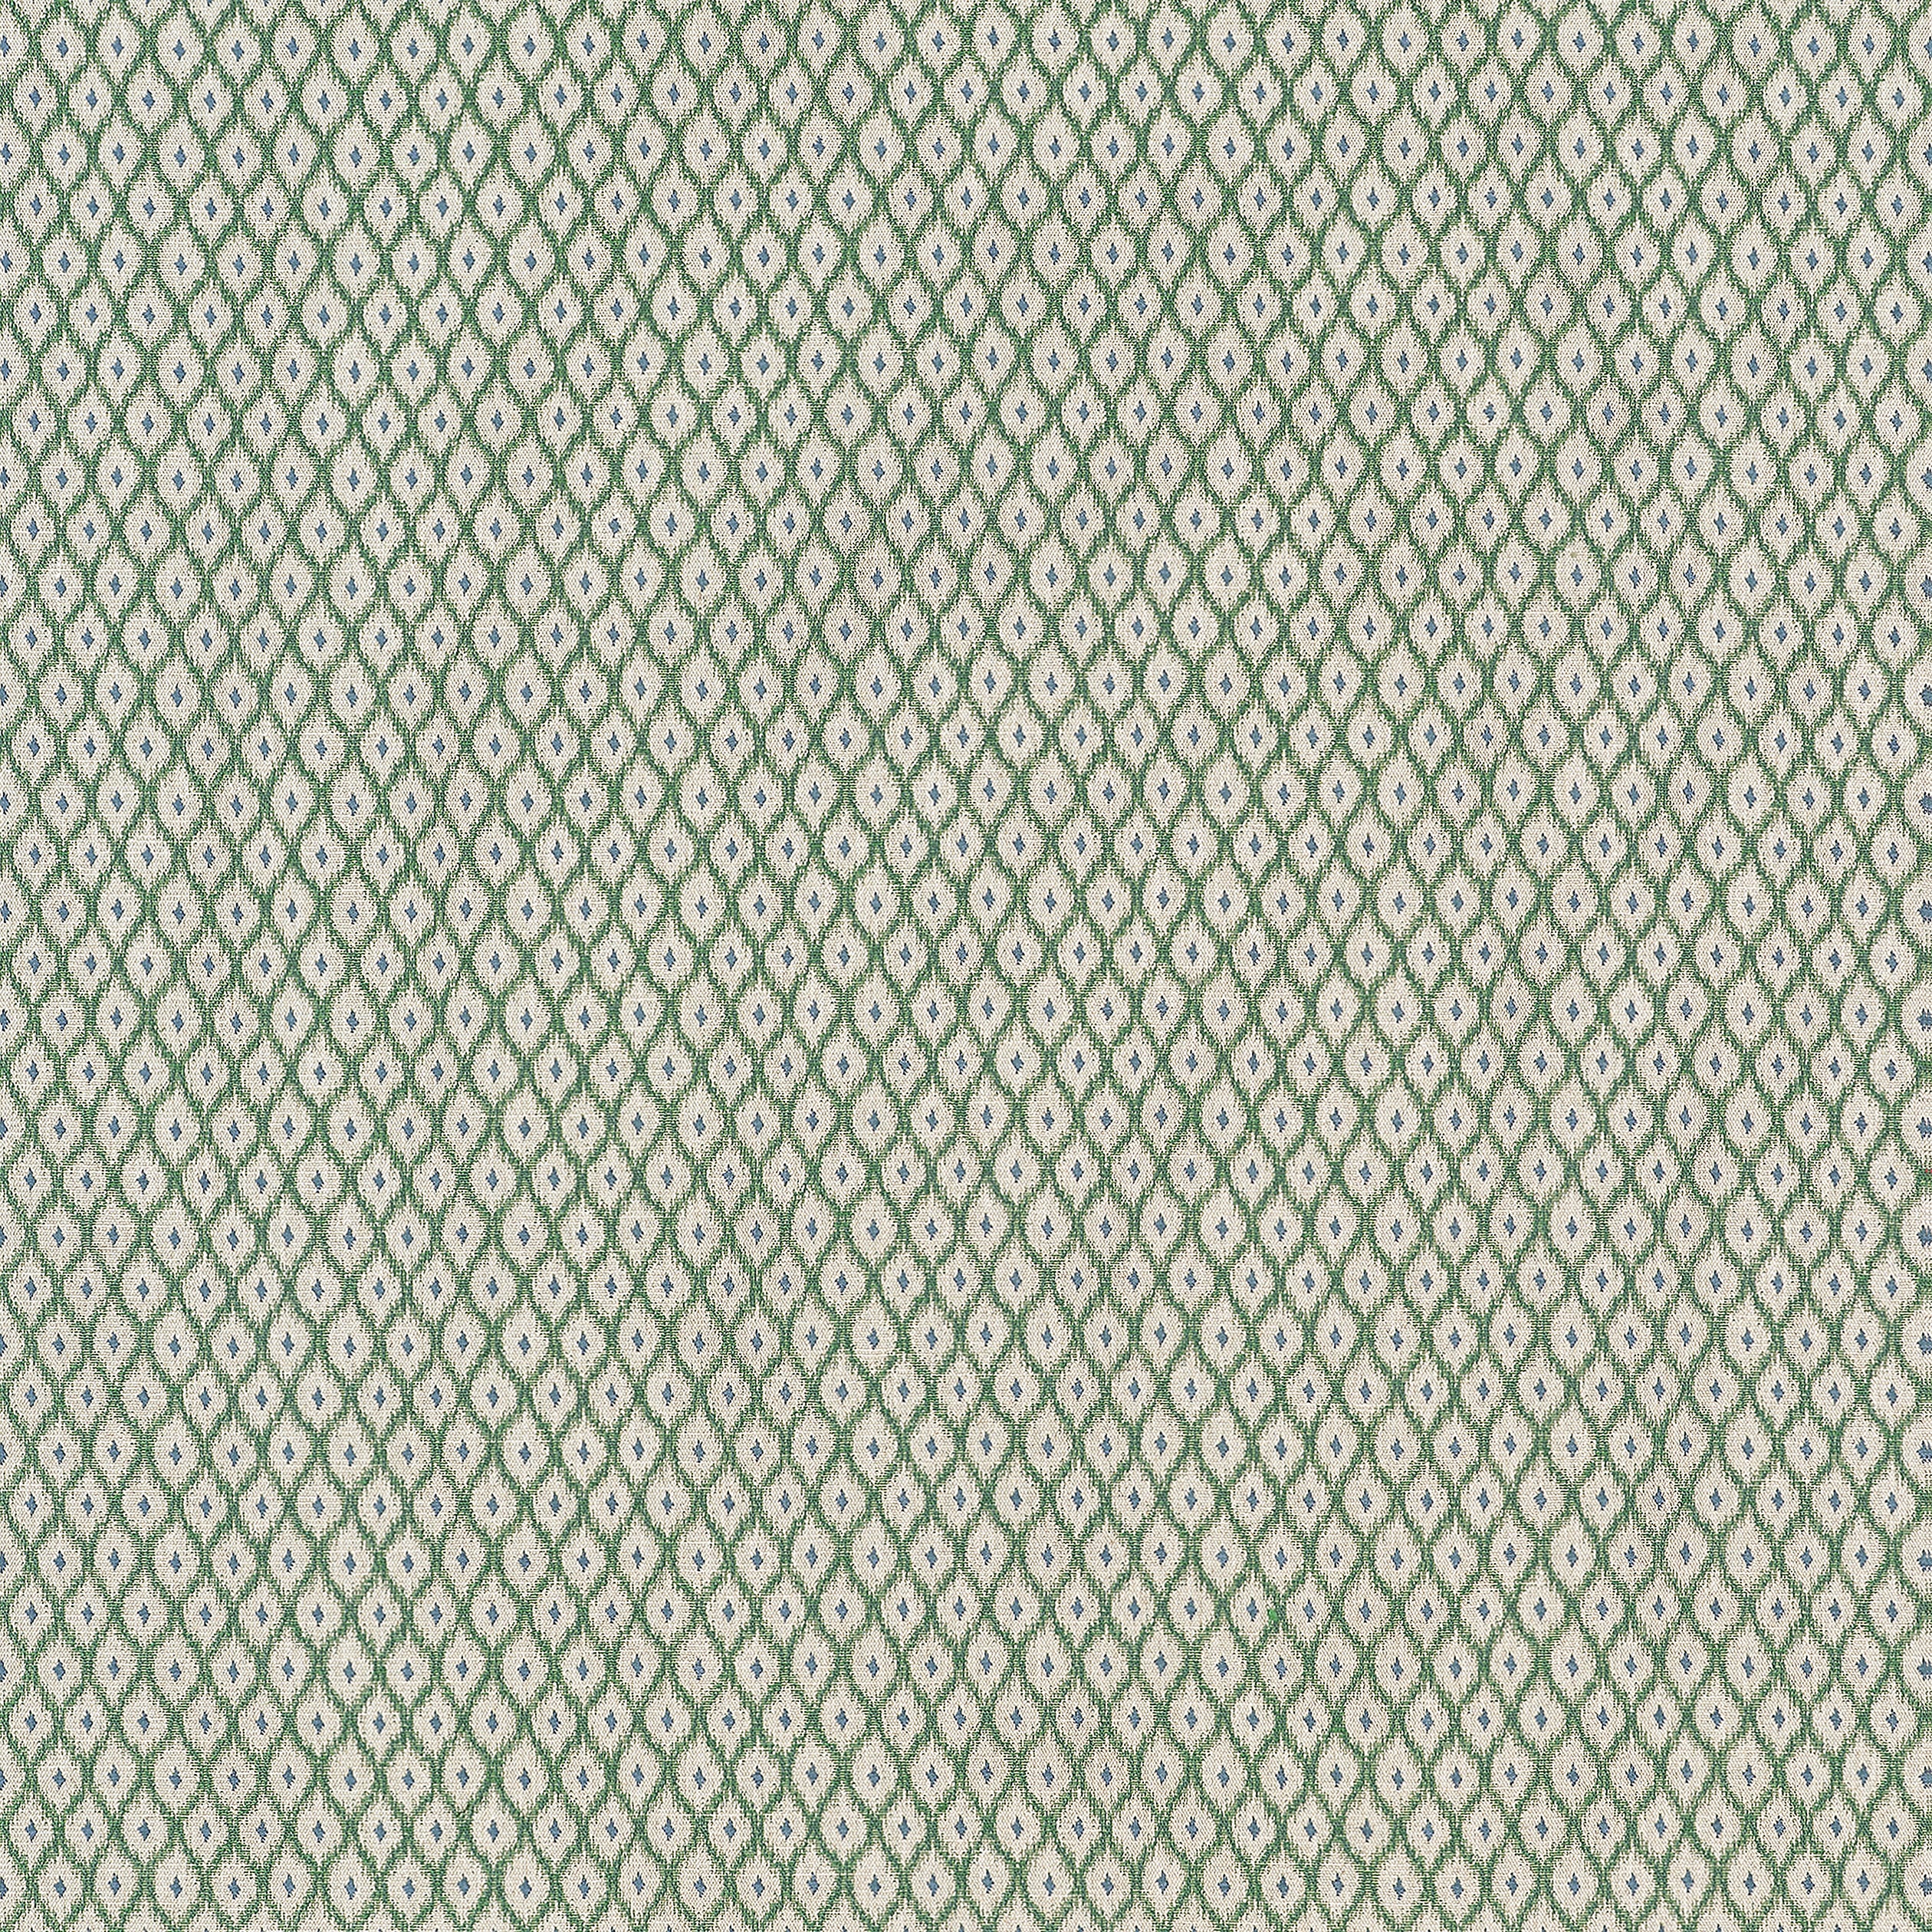 Josephine fabric in emerald color - pattern number W81905 - by Thibaut in the Companions collection